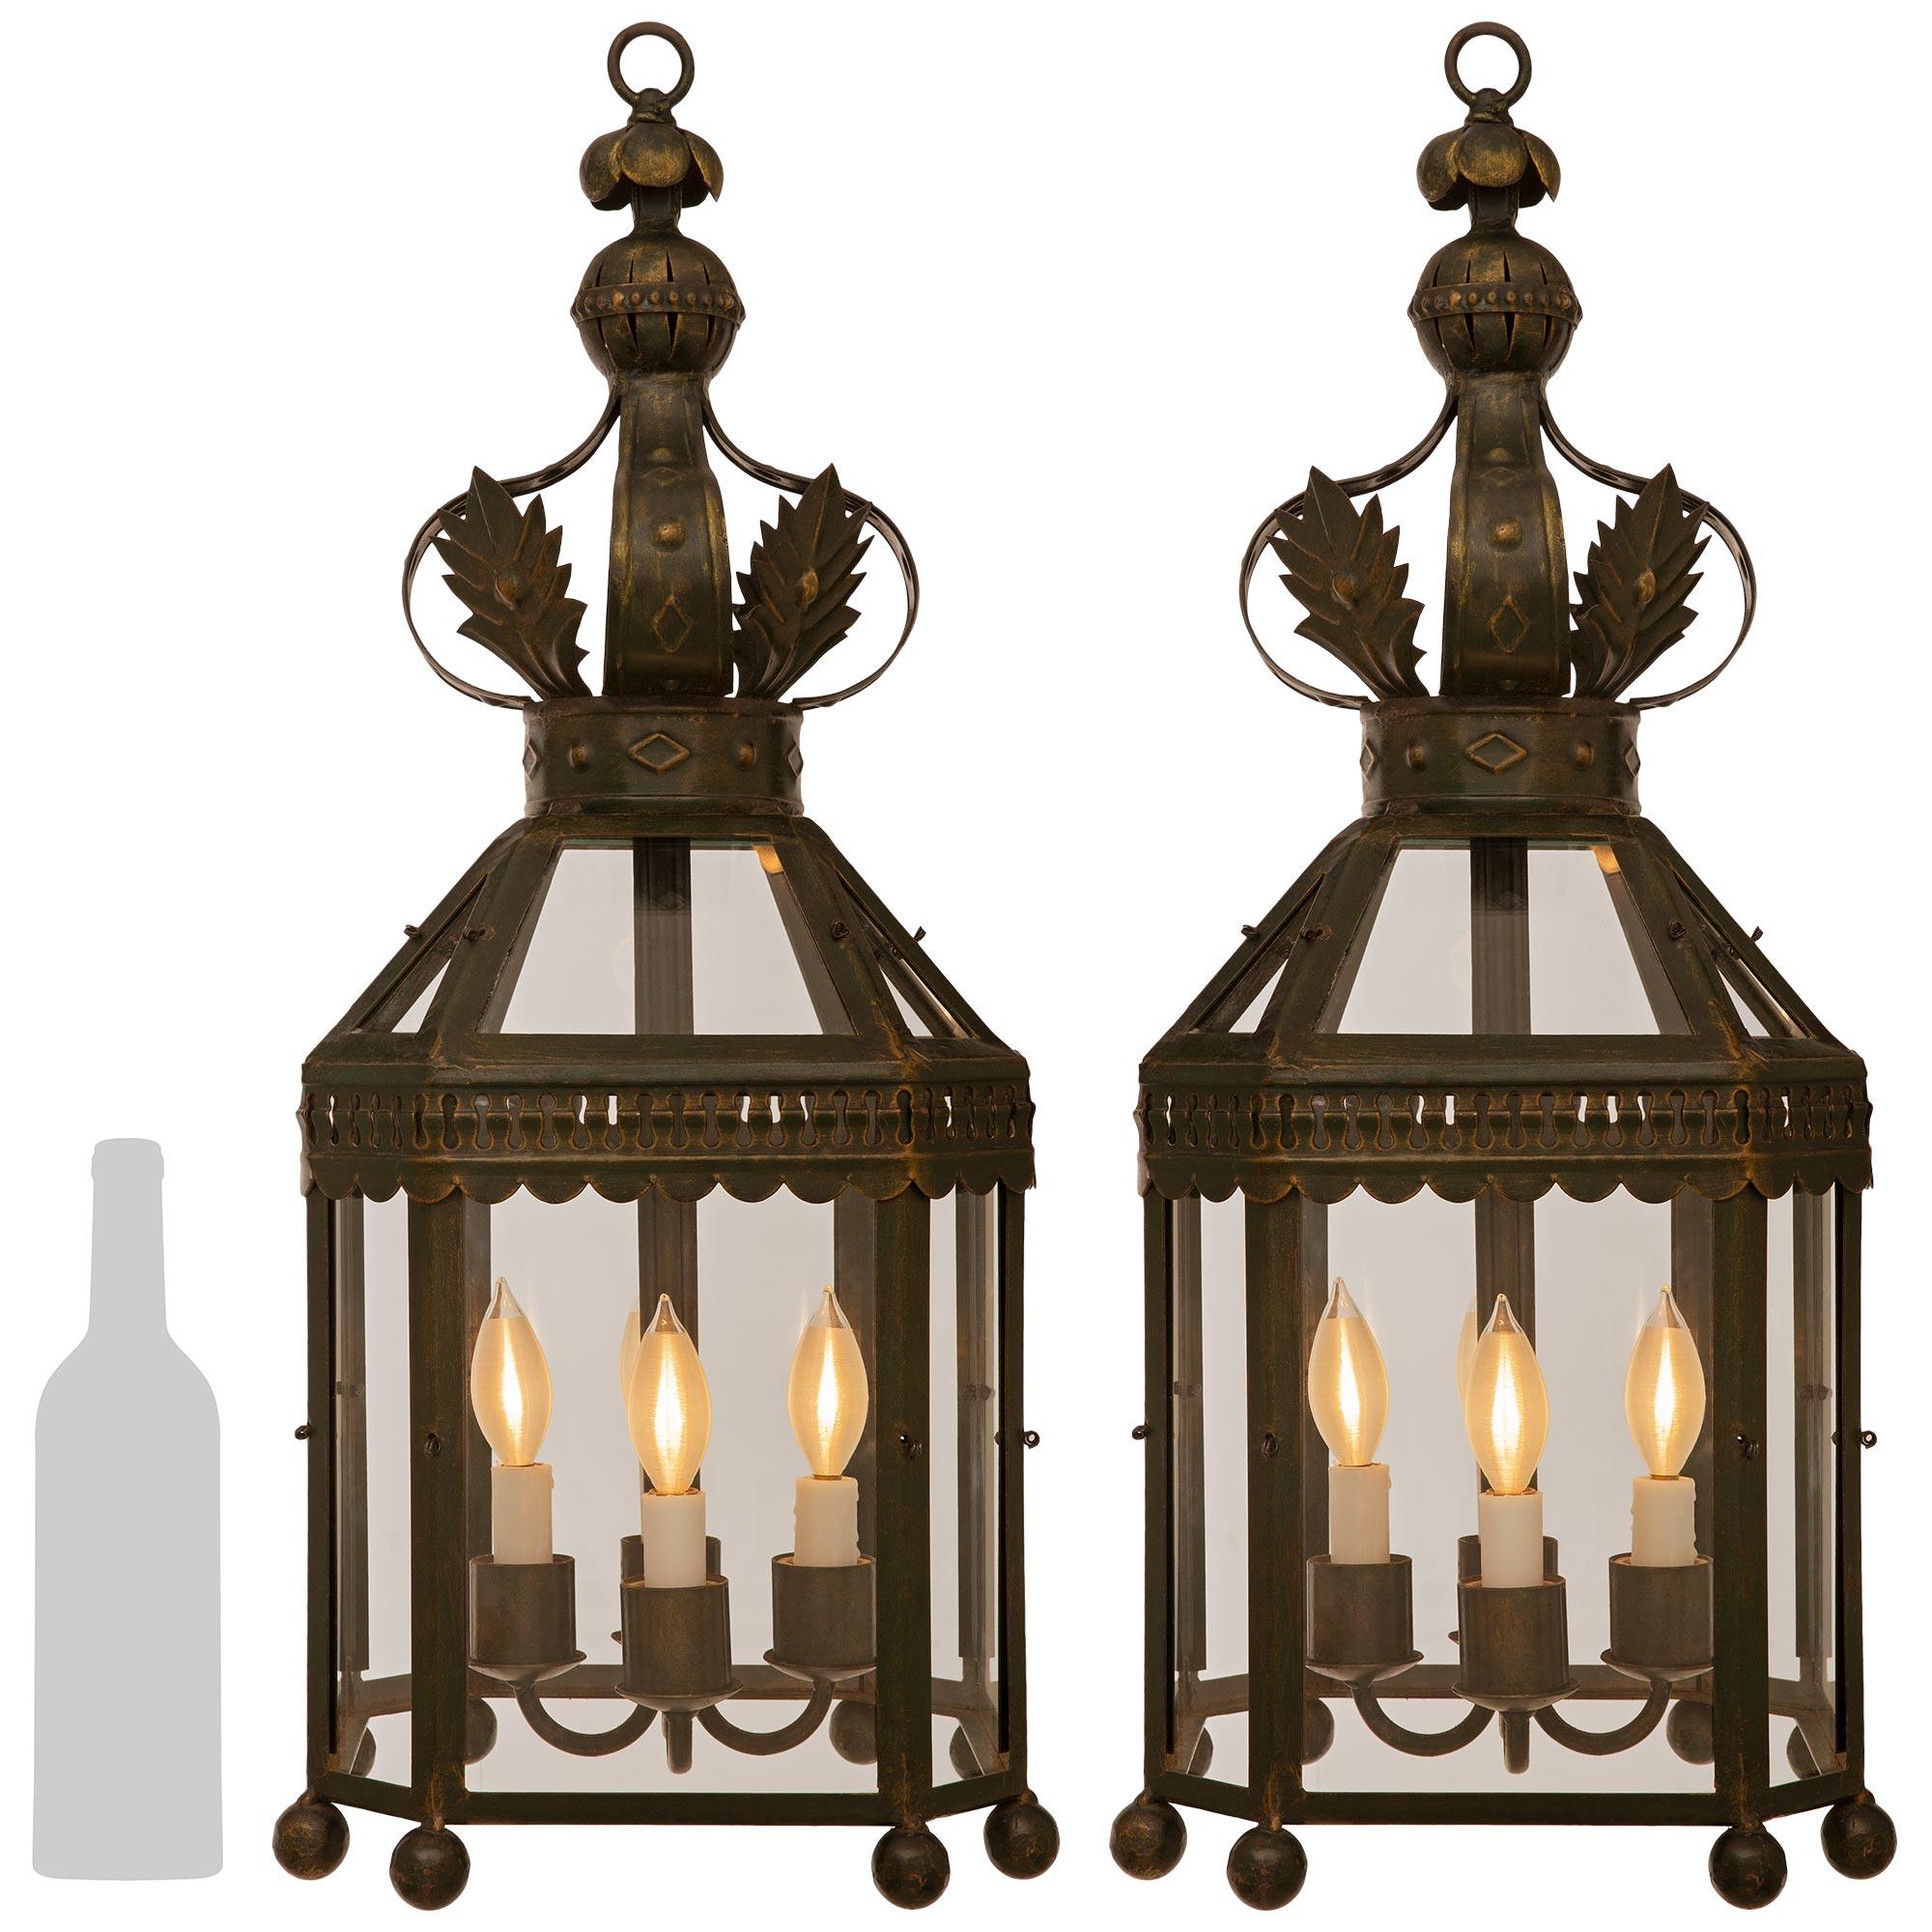 A handsome set of four French Turn of the Century Louis XVI st. Wrought Iron lanterns. Each octagonal four arm four light lantern consist of an eight sided cage with bottom spheres below each corner. Along the top edge is a scalloped Iron band below